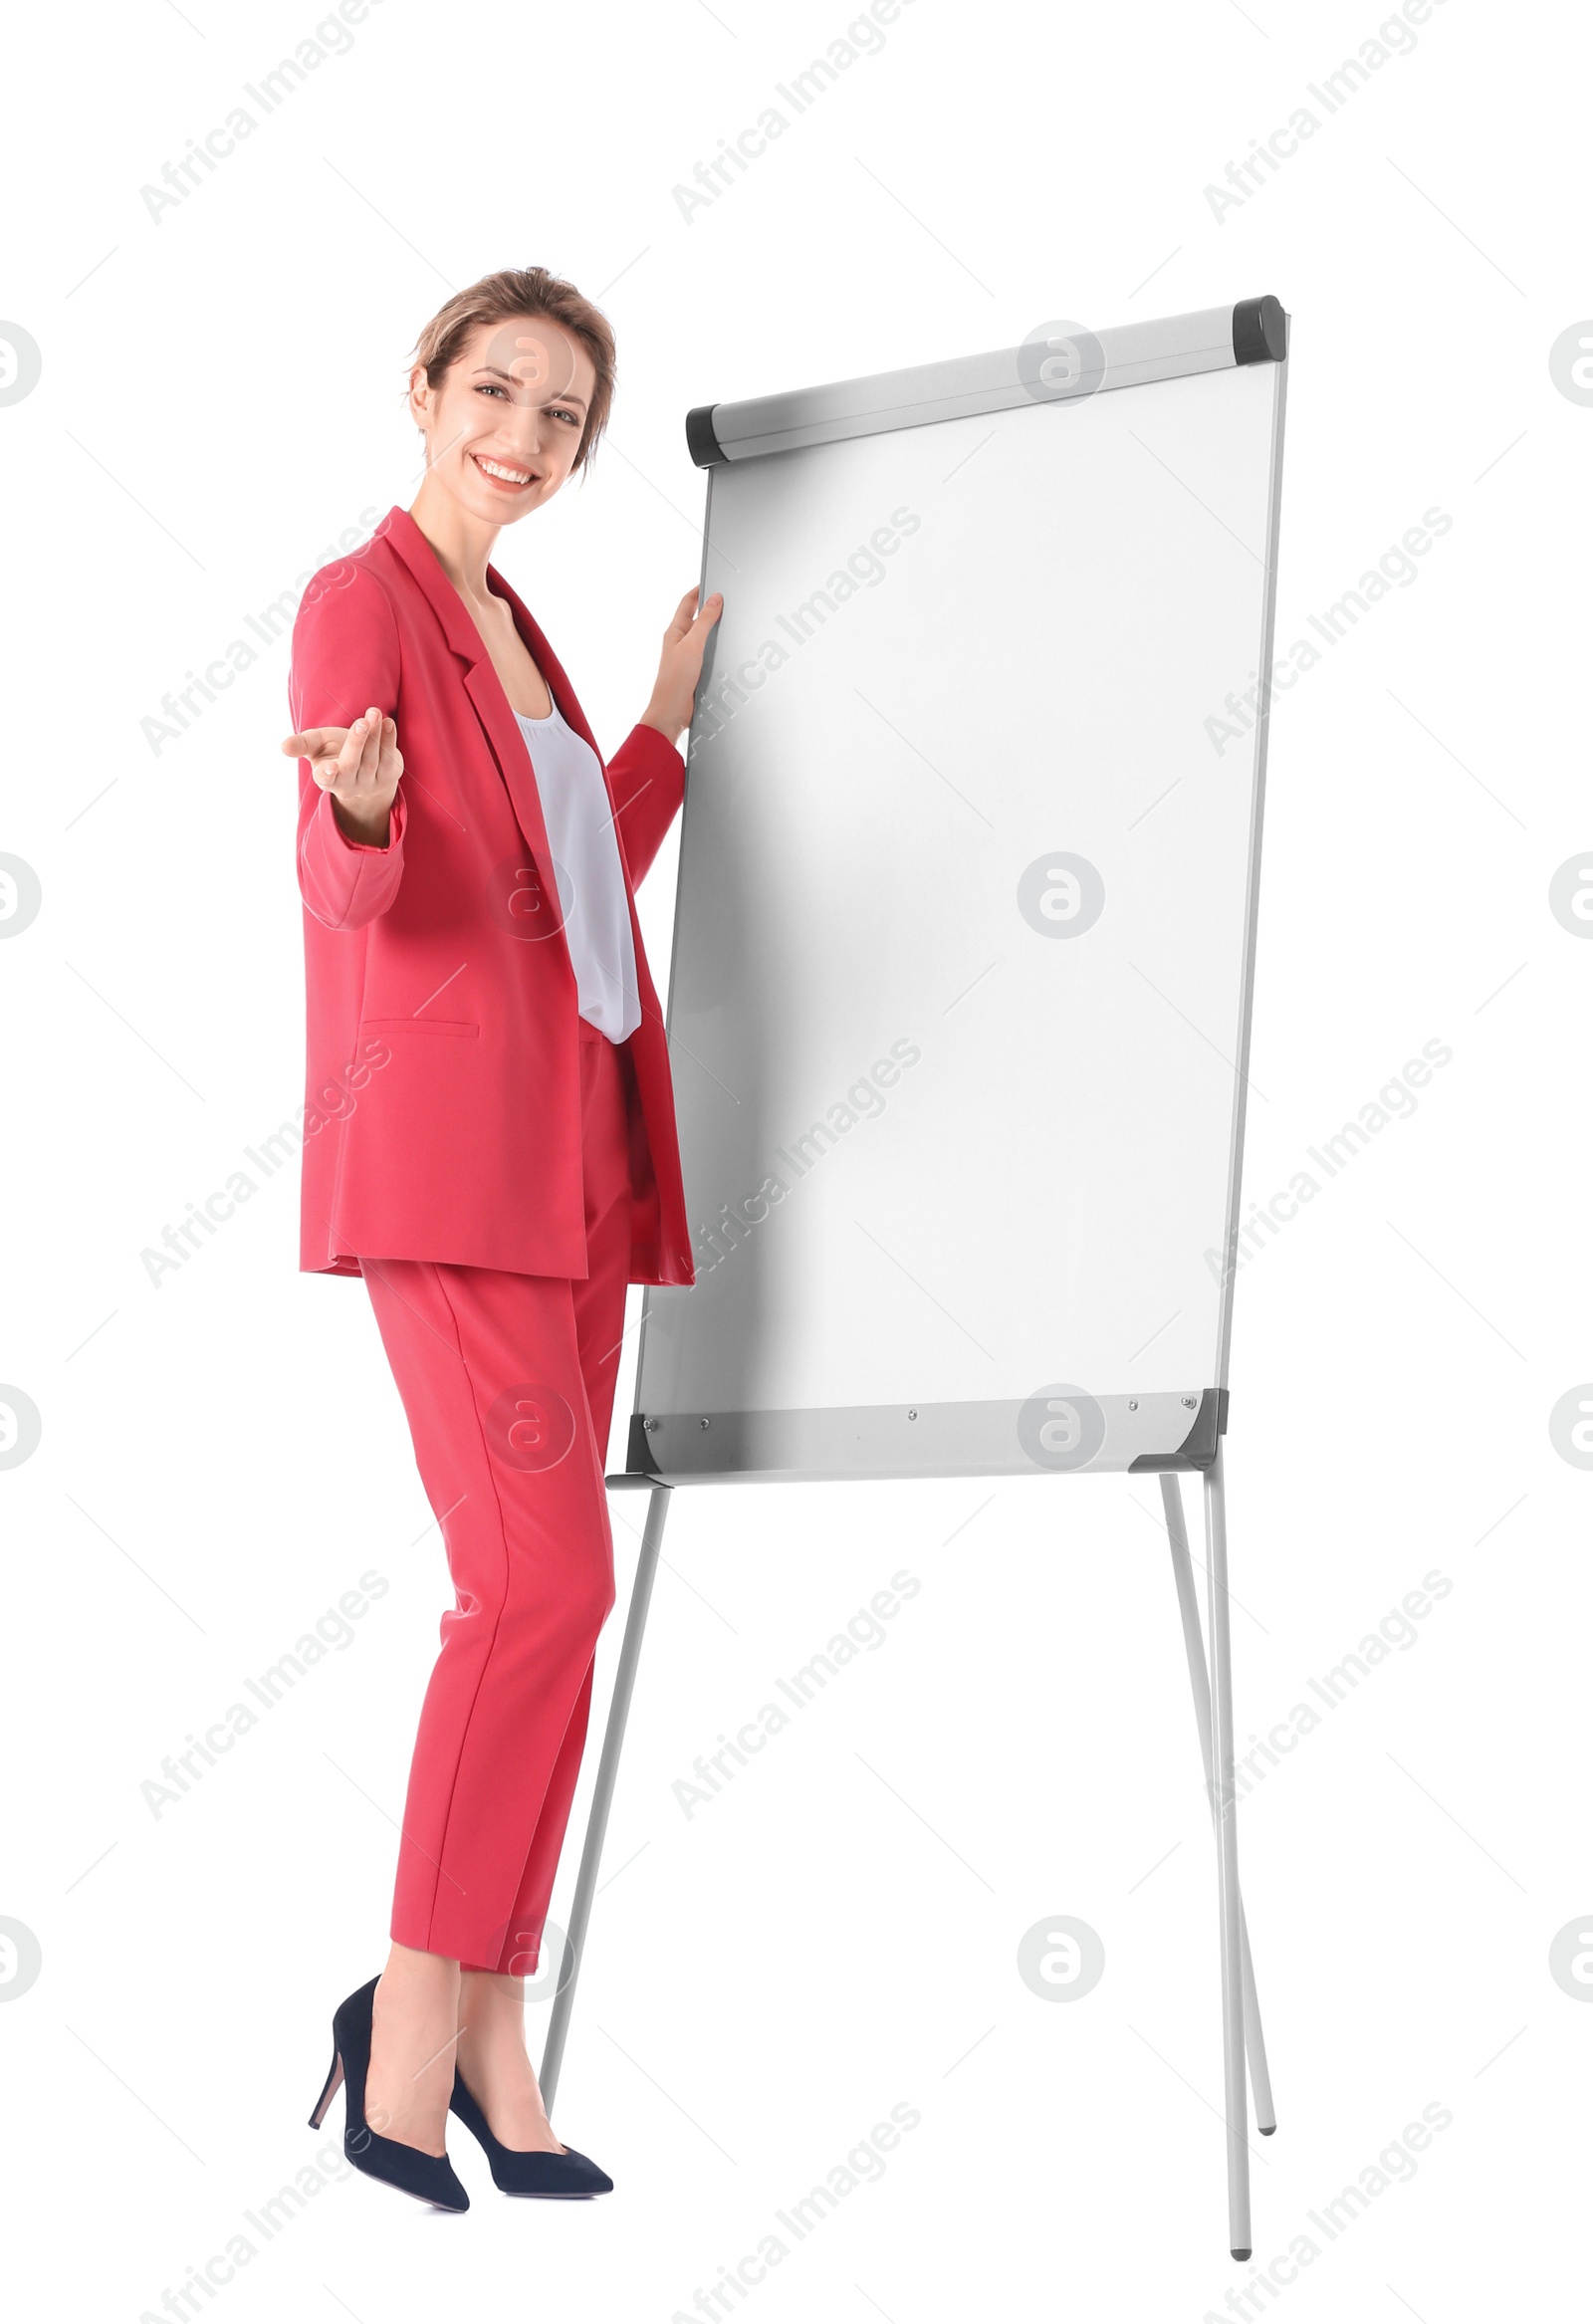 Photo of Female business trainer giving presentation on board against white background